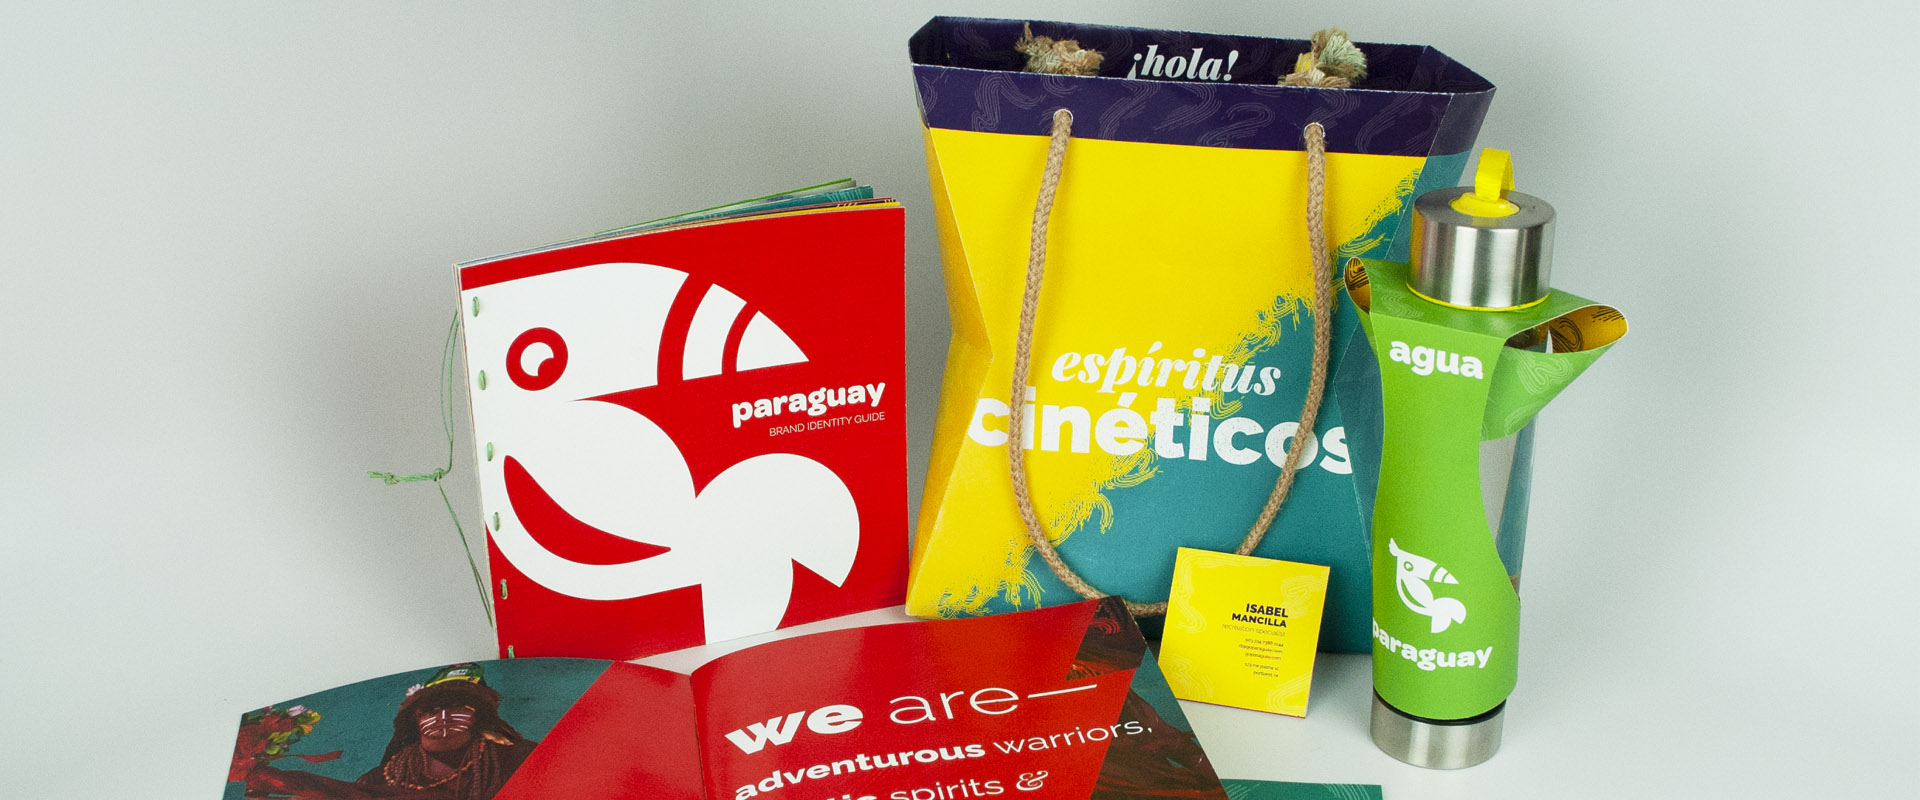 Paraguay brand packaging